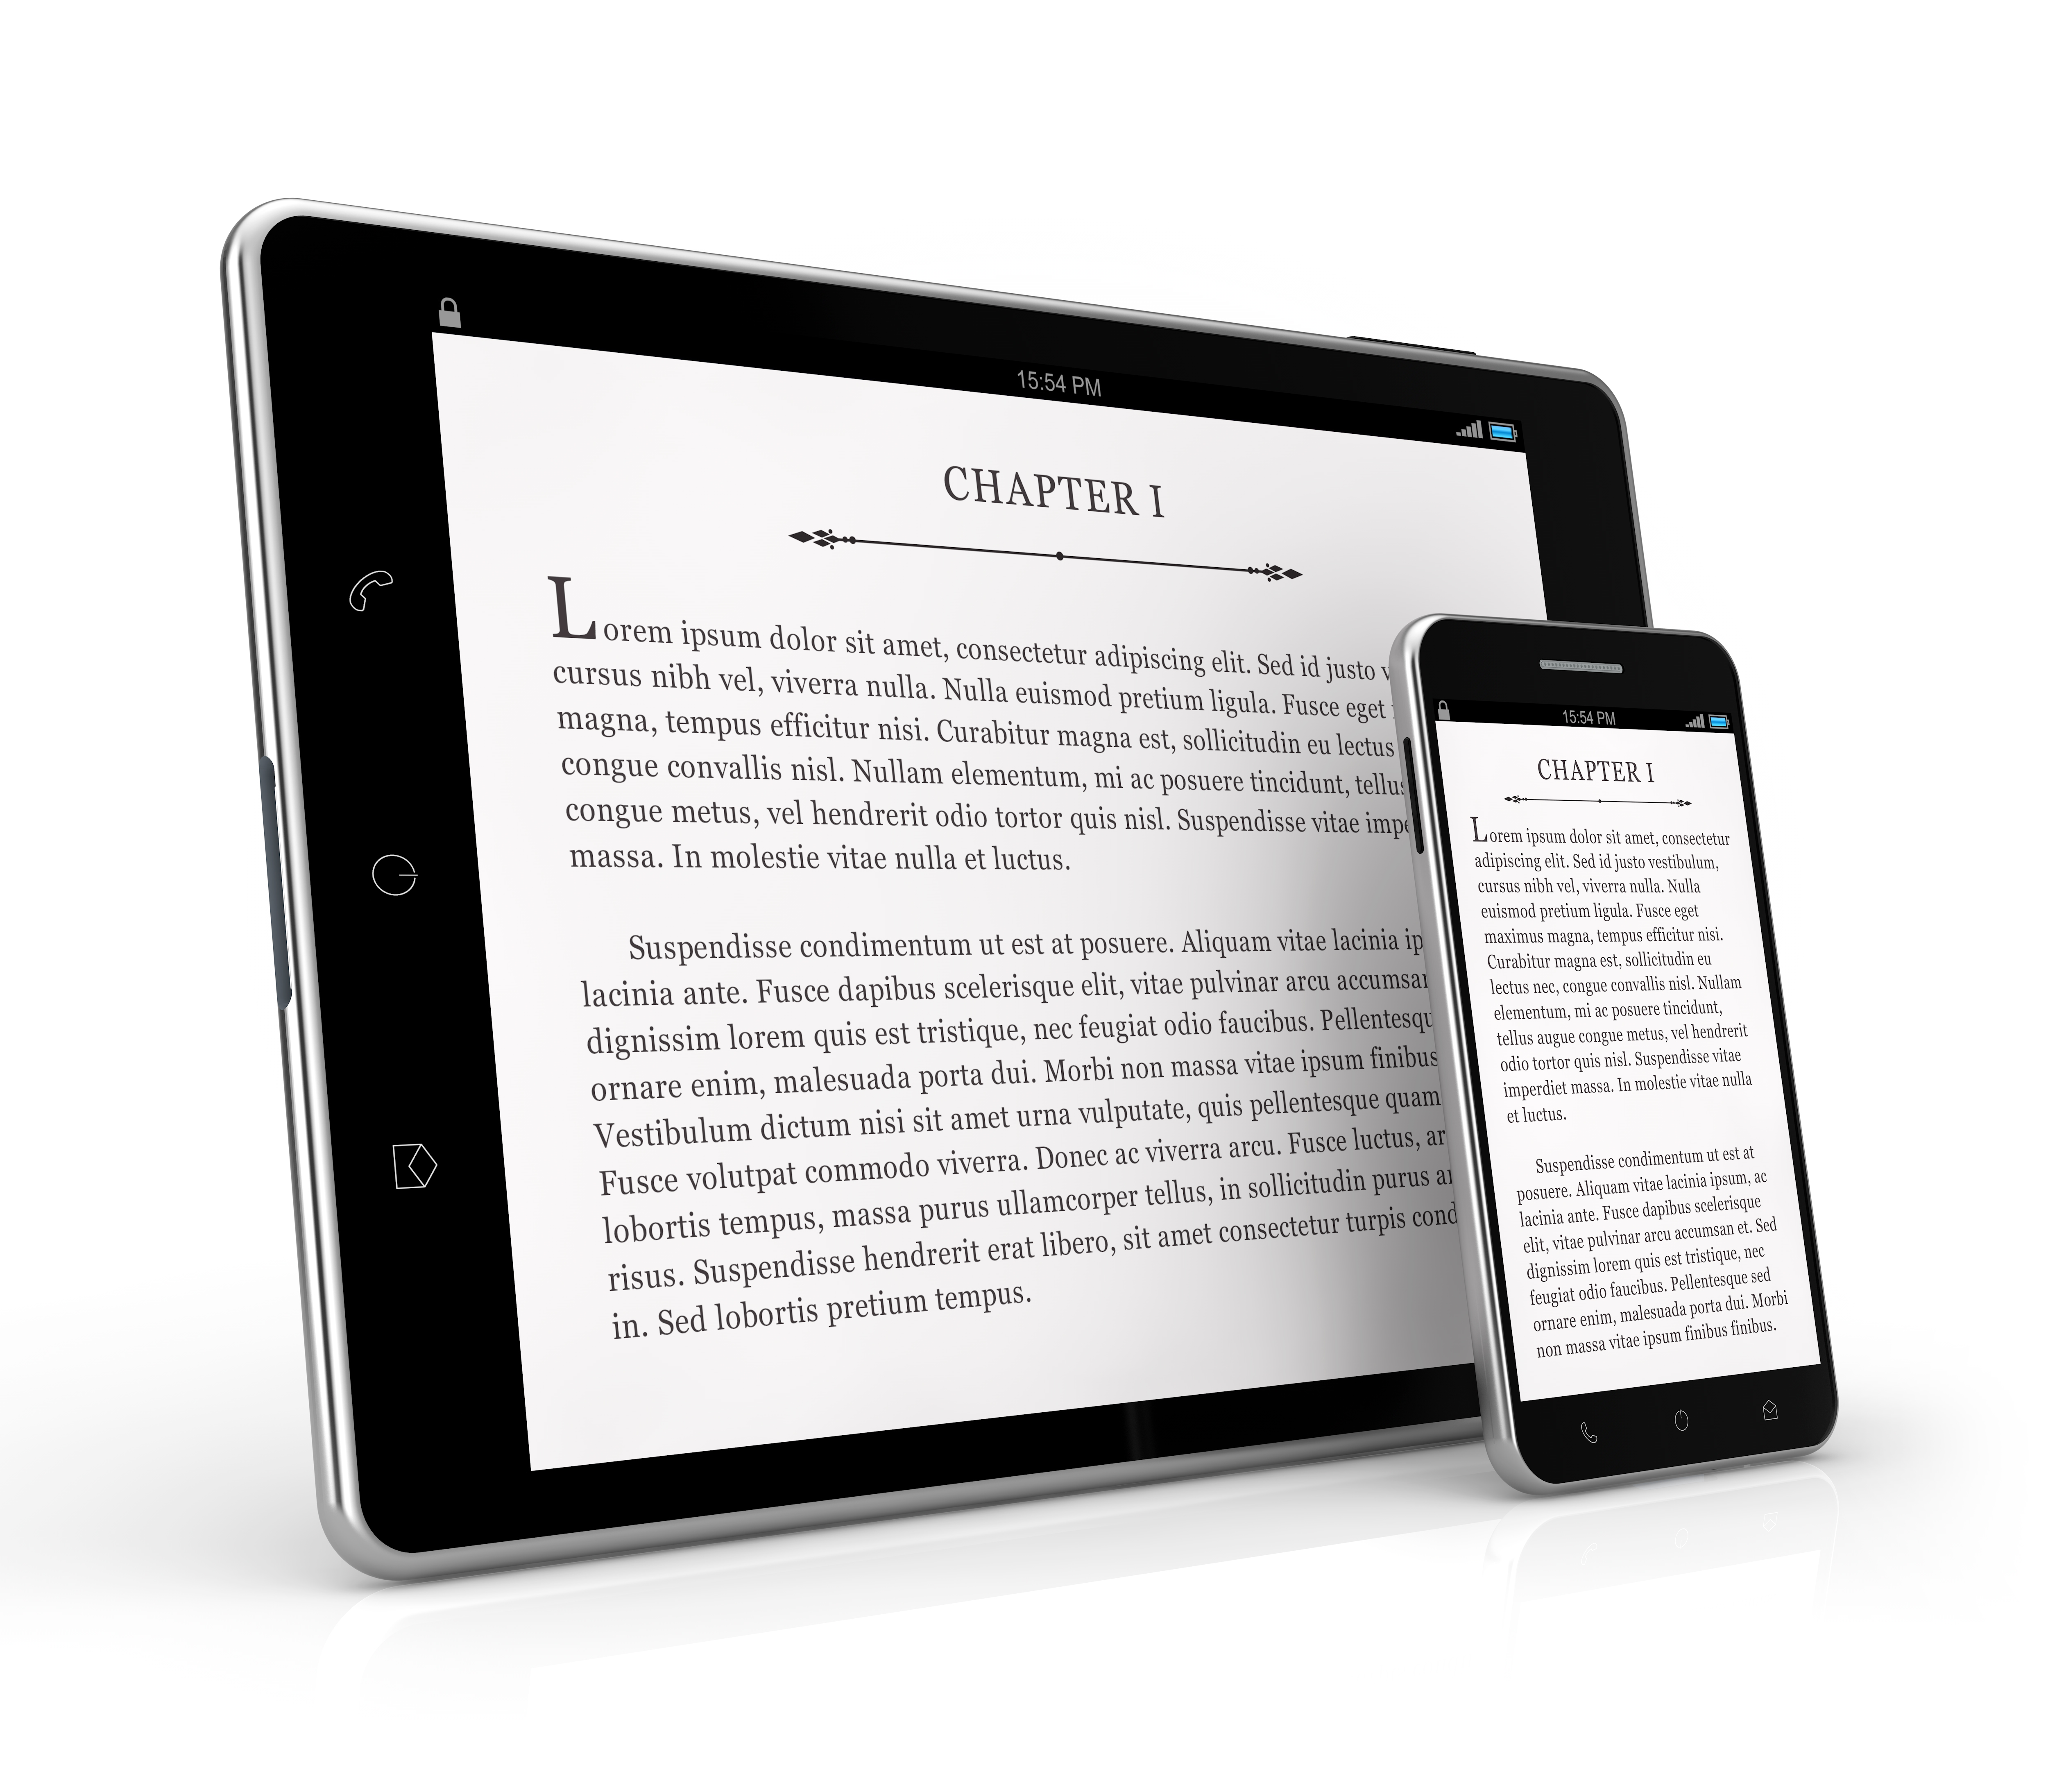 Ebook on Electronic Devices